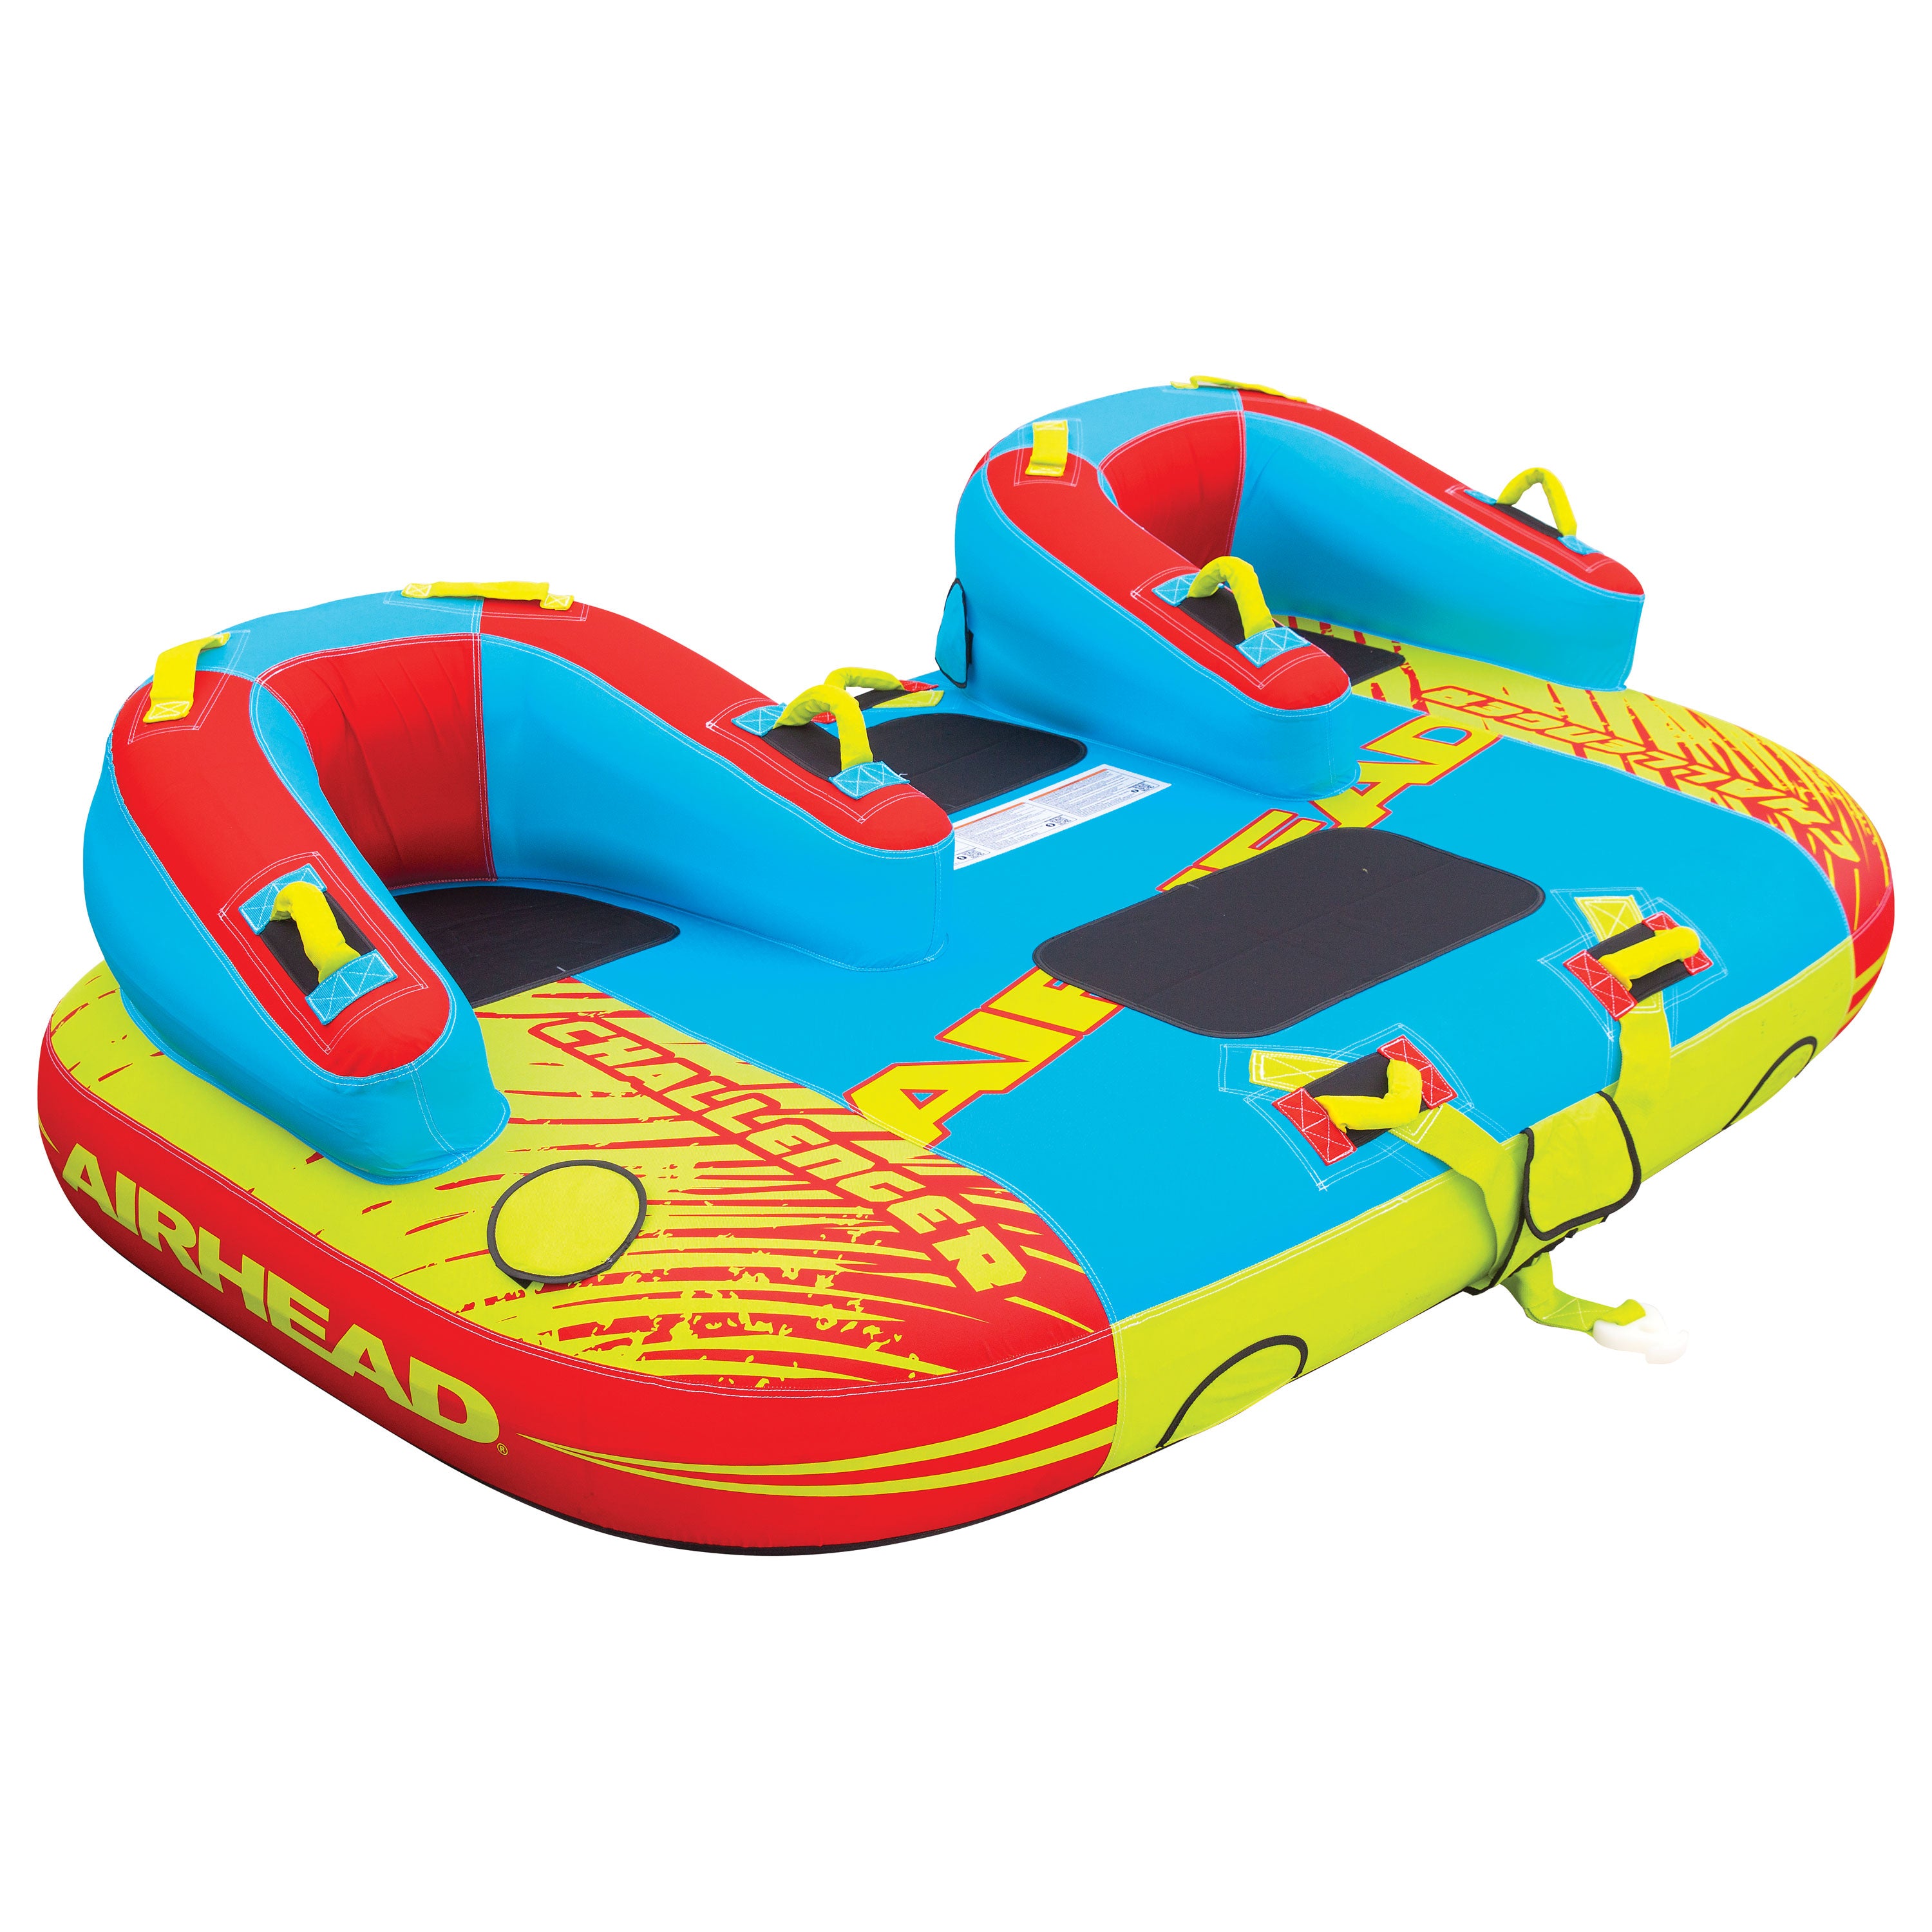 Airhead AHCH-03 Challenger Inflatable 1-3 Rider Towable